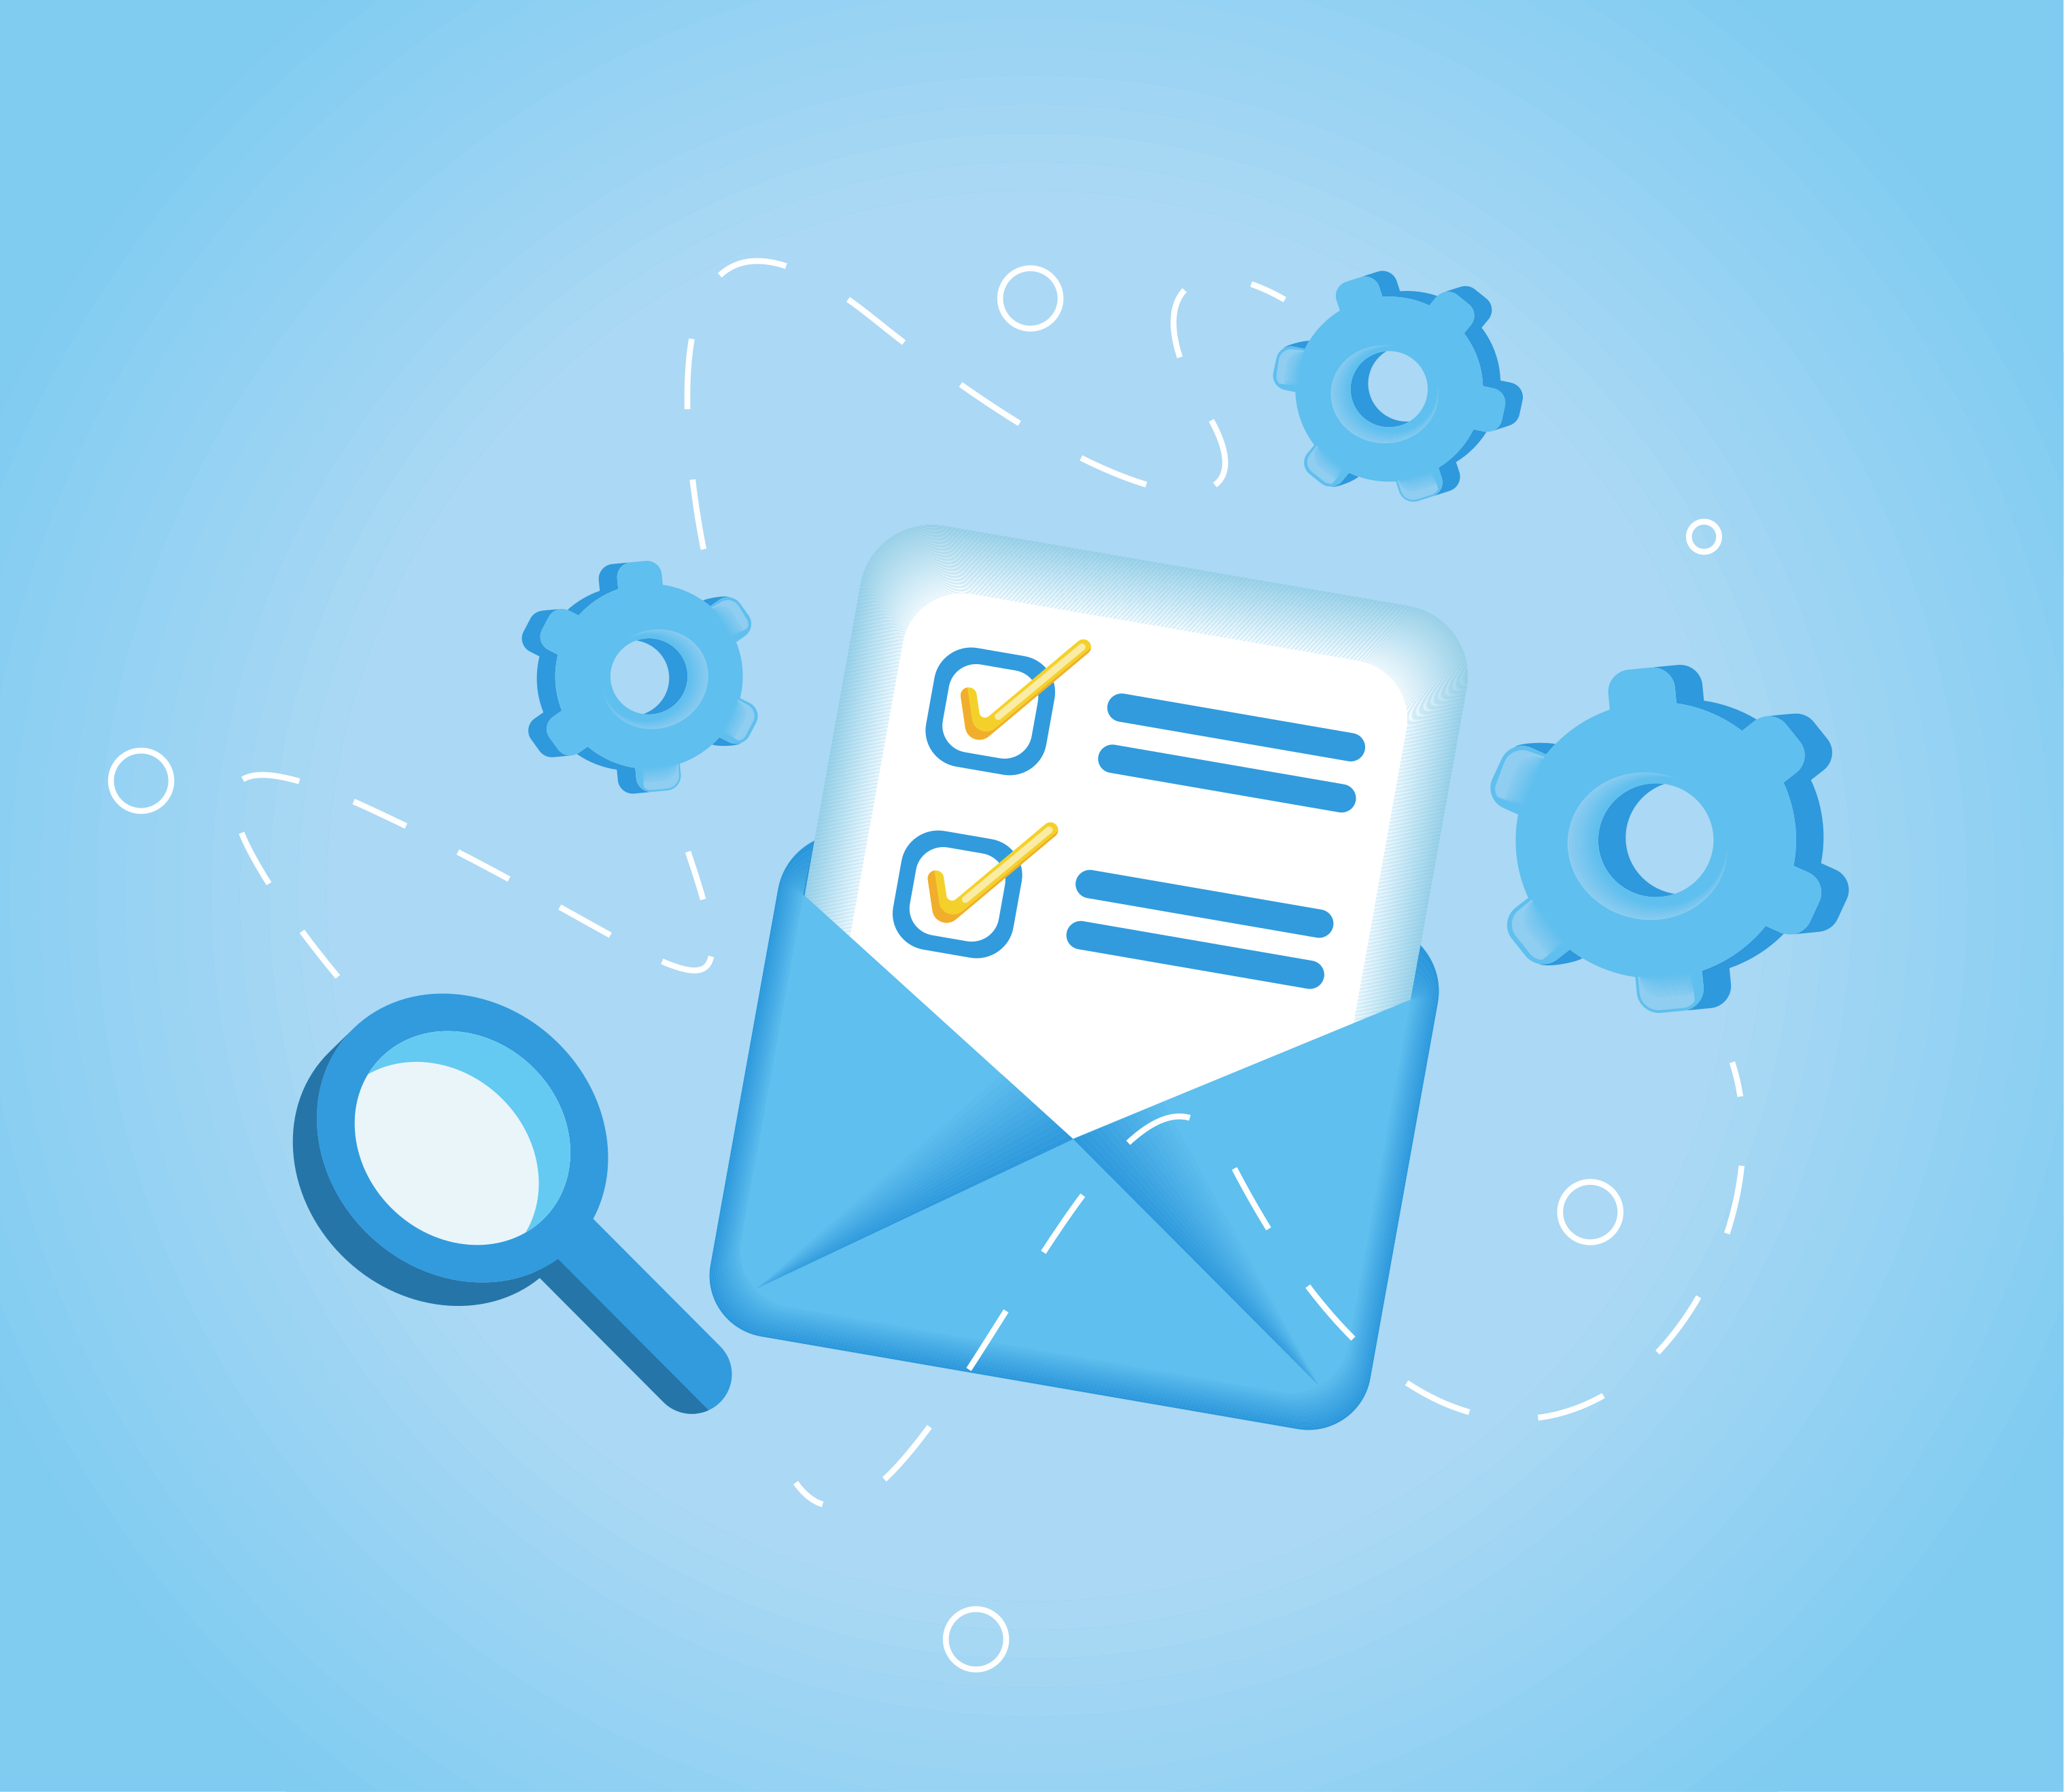 A professional email address increases customers’ trust